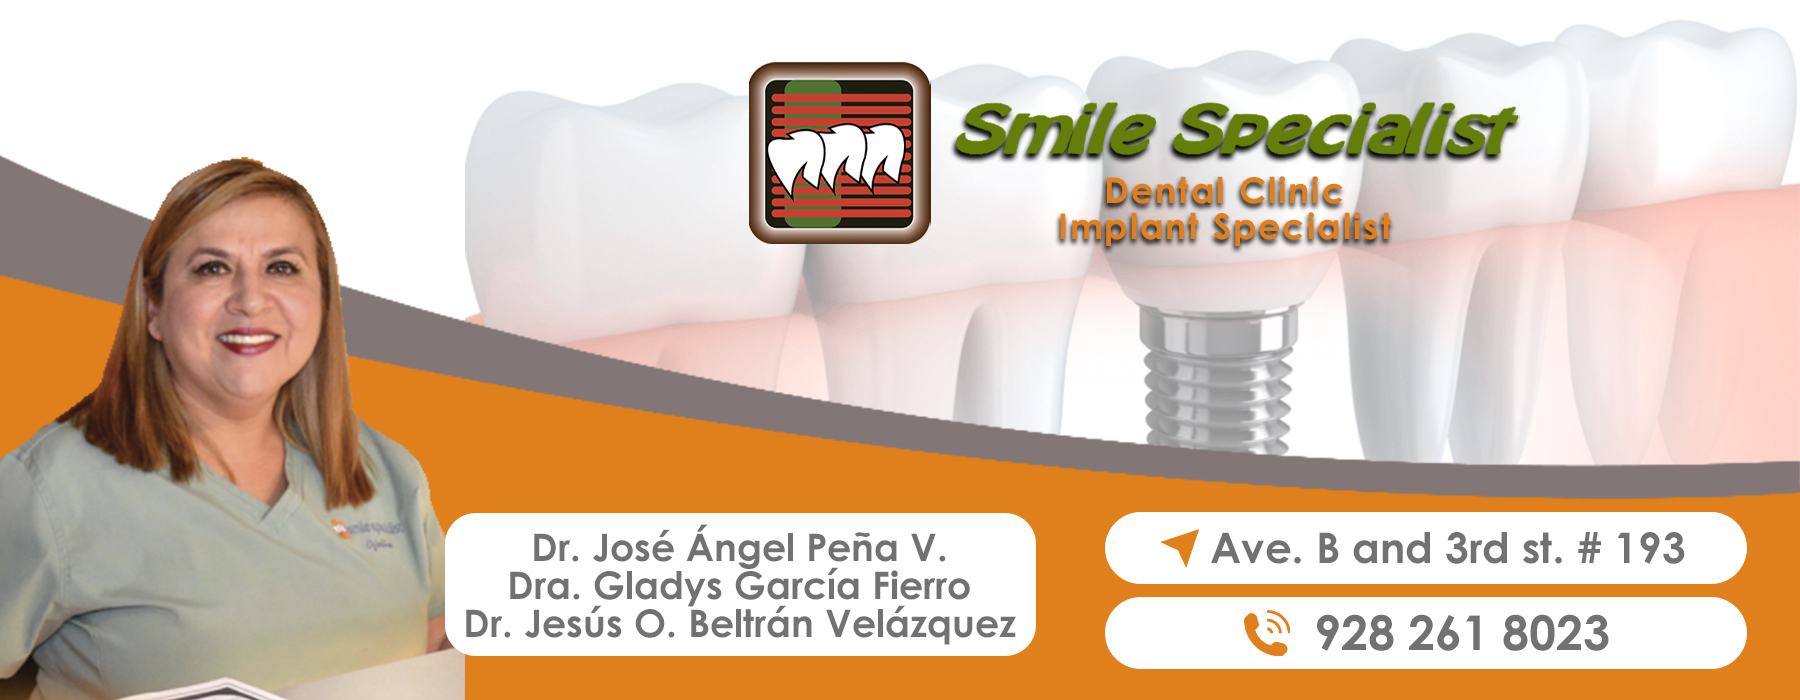 Smile Specialist dental clinic